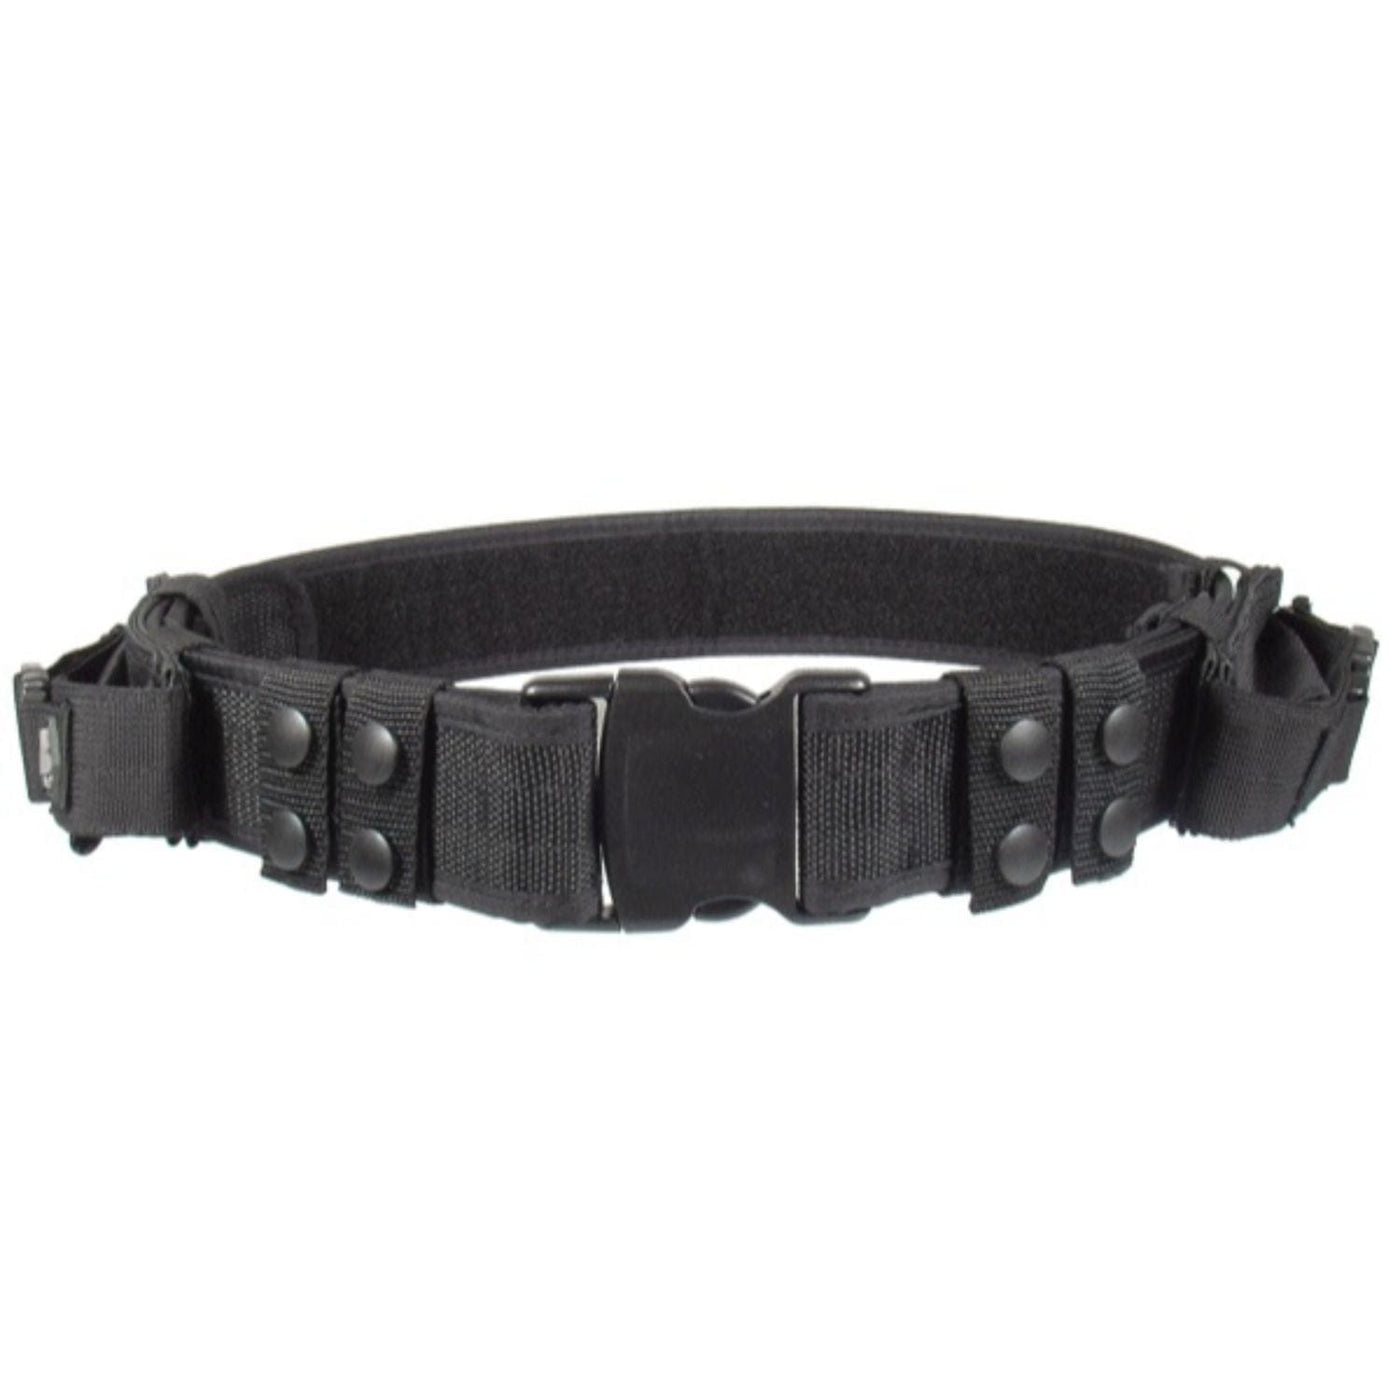 Leapers Leapers UTG Law Enforcement and Security Duty Belt-Black Apparel